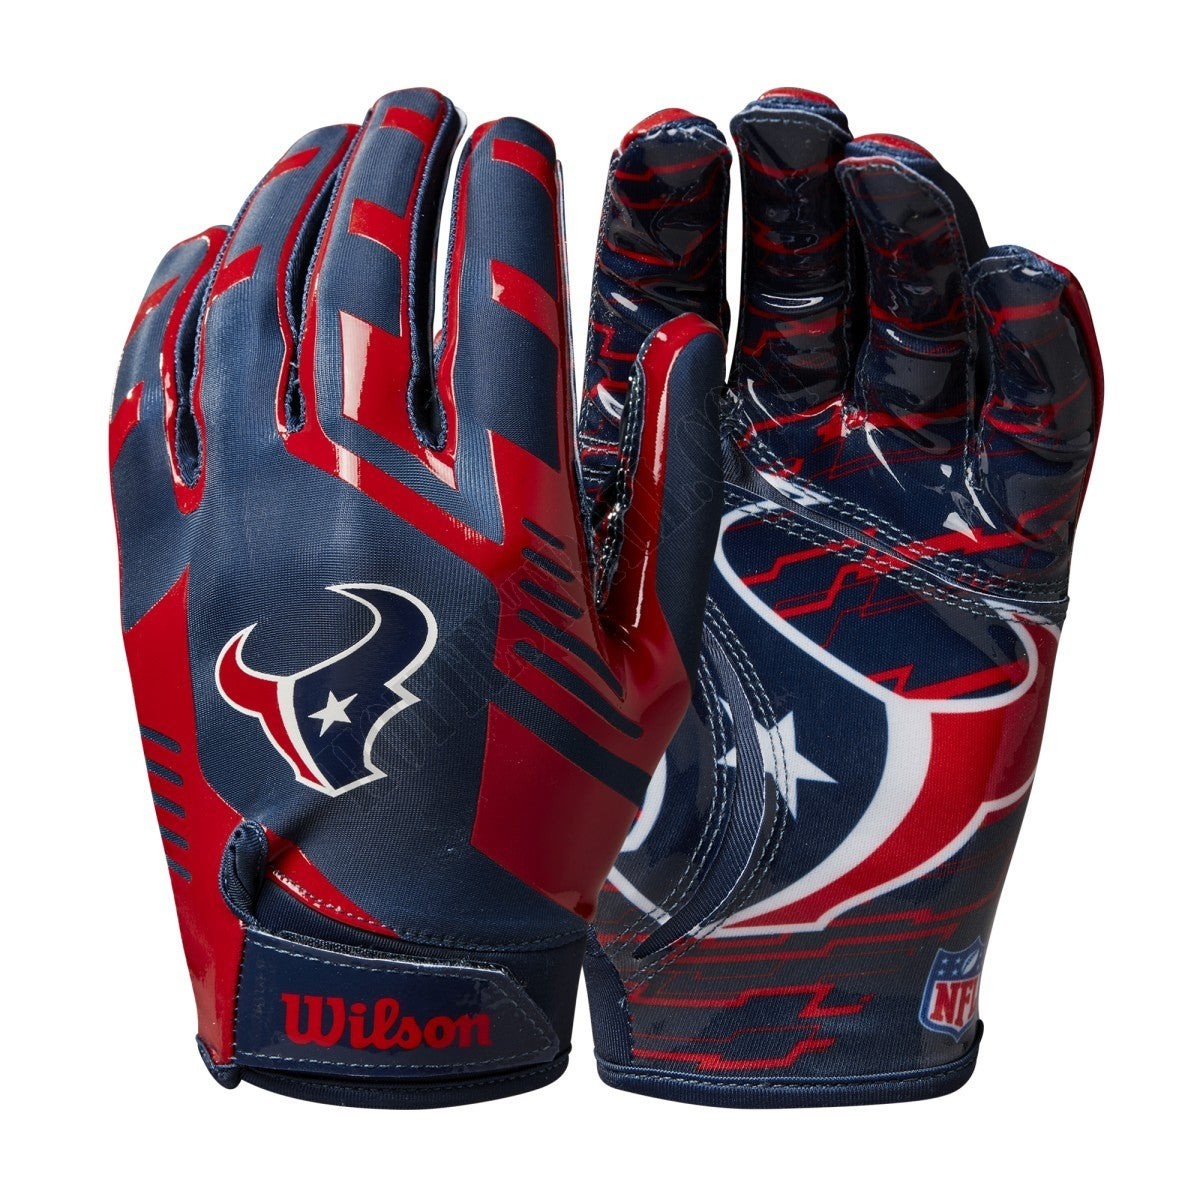 NFL Stretch Fit Receivers Gloves - Houston Texans ● Wilson Promotions - NFL Stretch Fit Receivers Gloves - Houston Texans ● Wilson Promotions